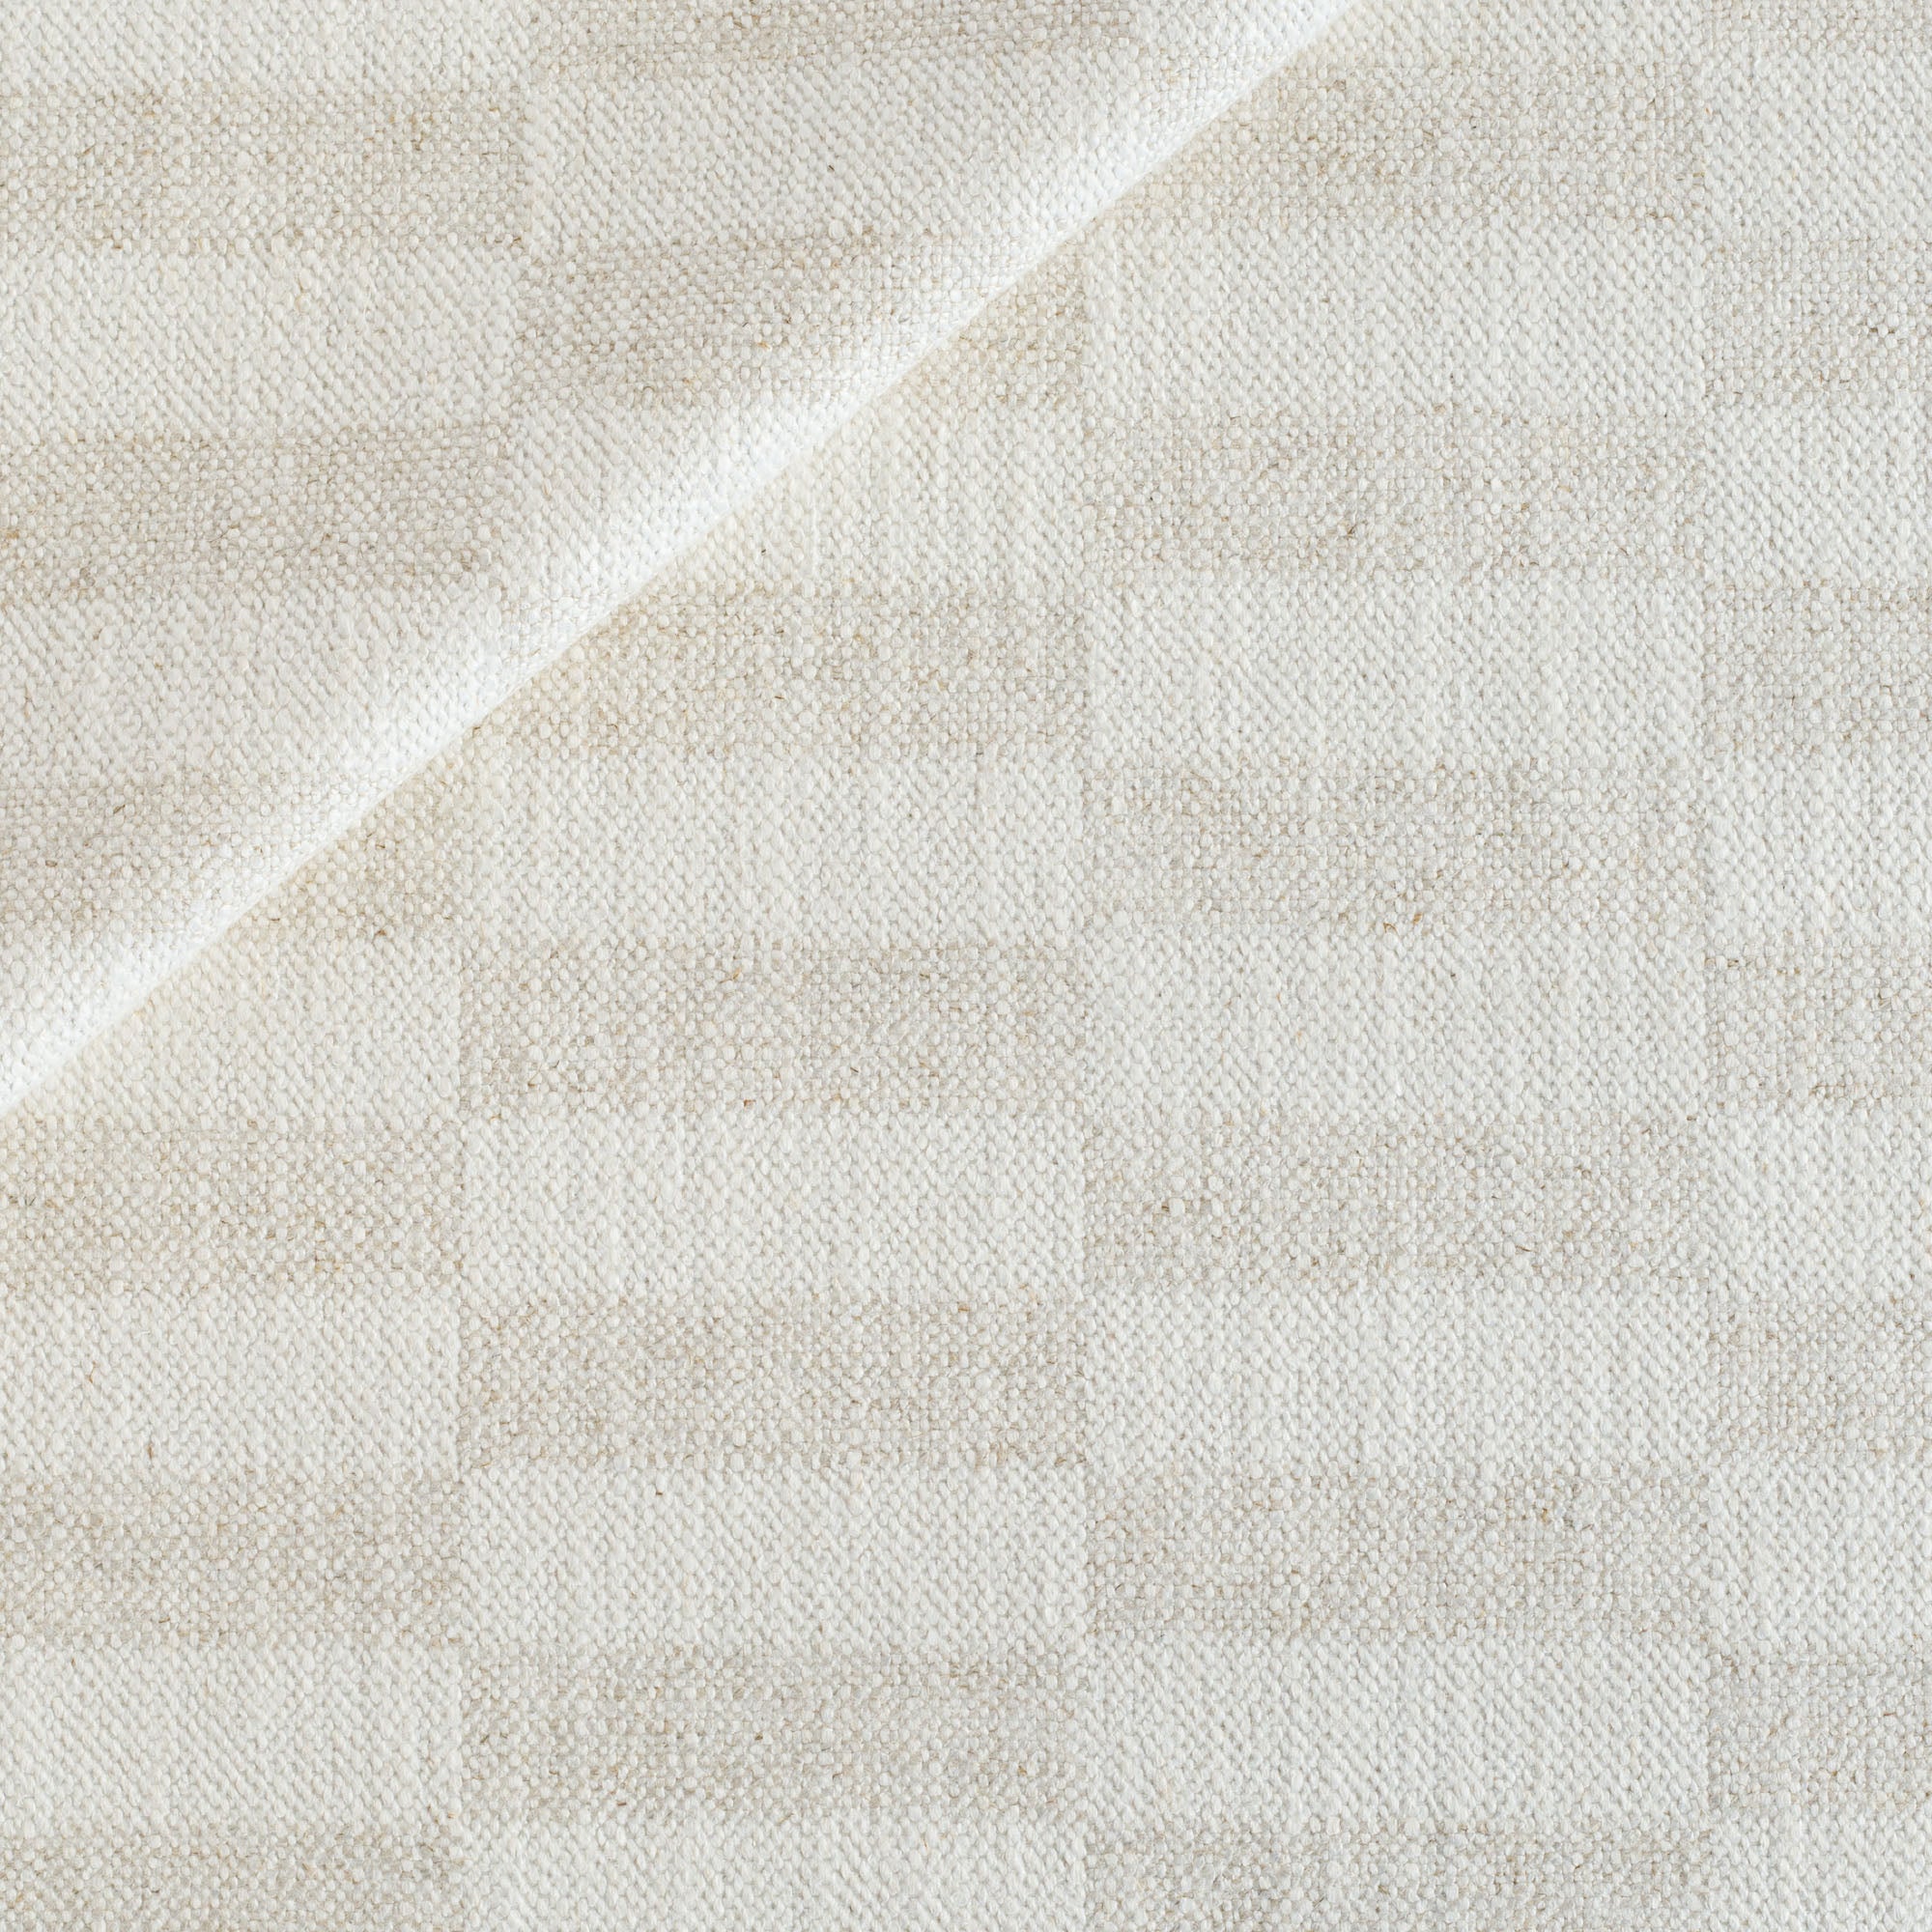 Webster Buff, a multipurpose cream and beige checkerboard patterned home decor fabric from Tonic Living